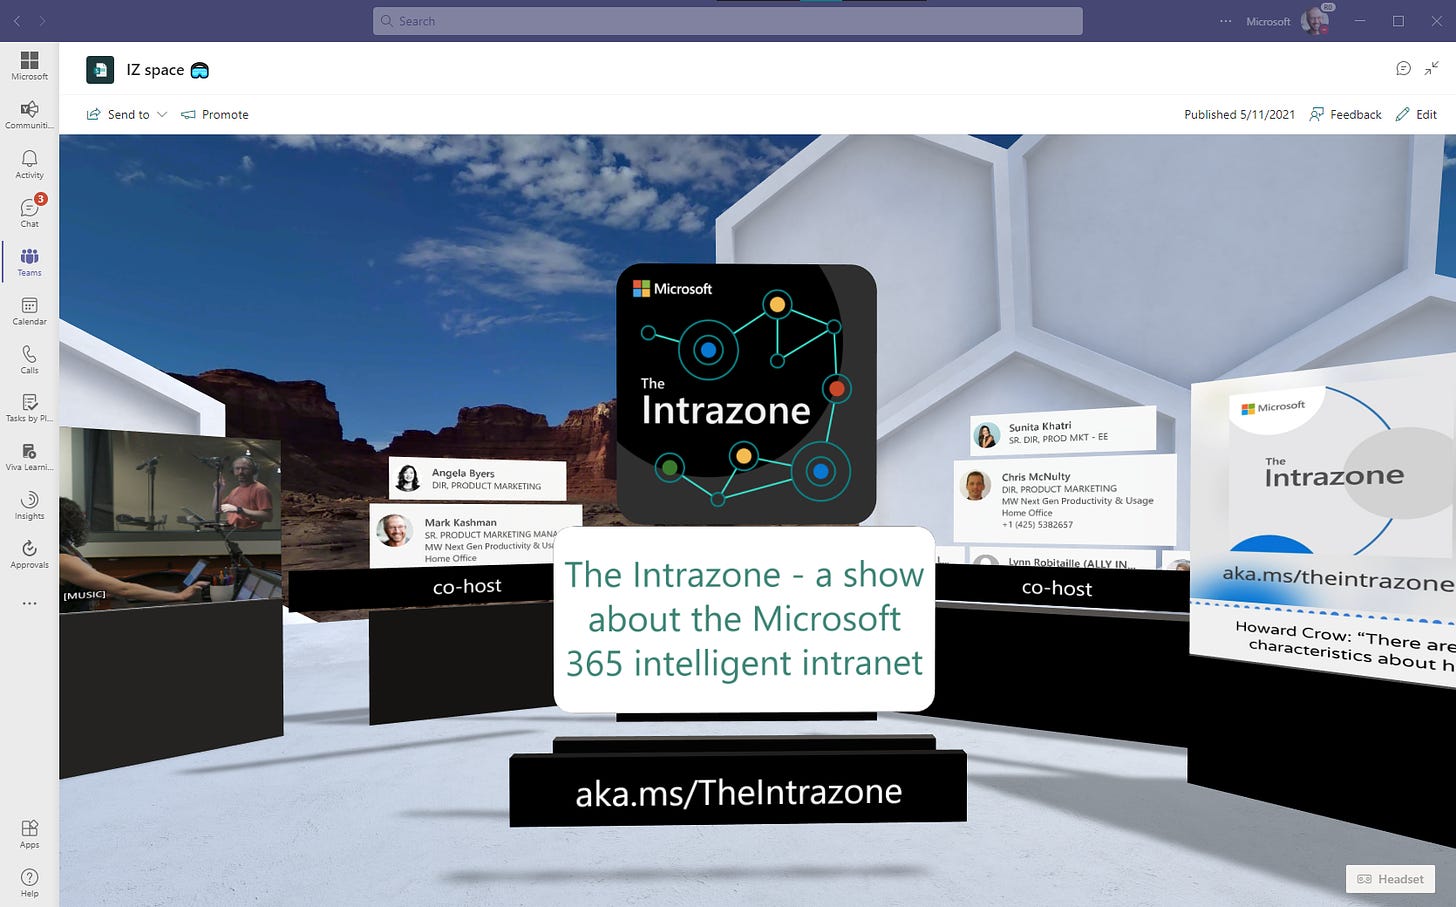 The Intrazone digital 3D calling card, used to answer the question, "What is this show about?"